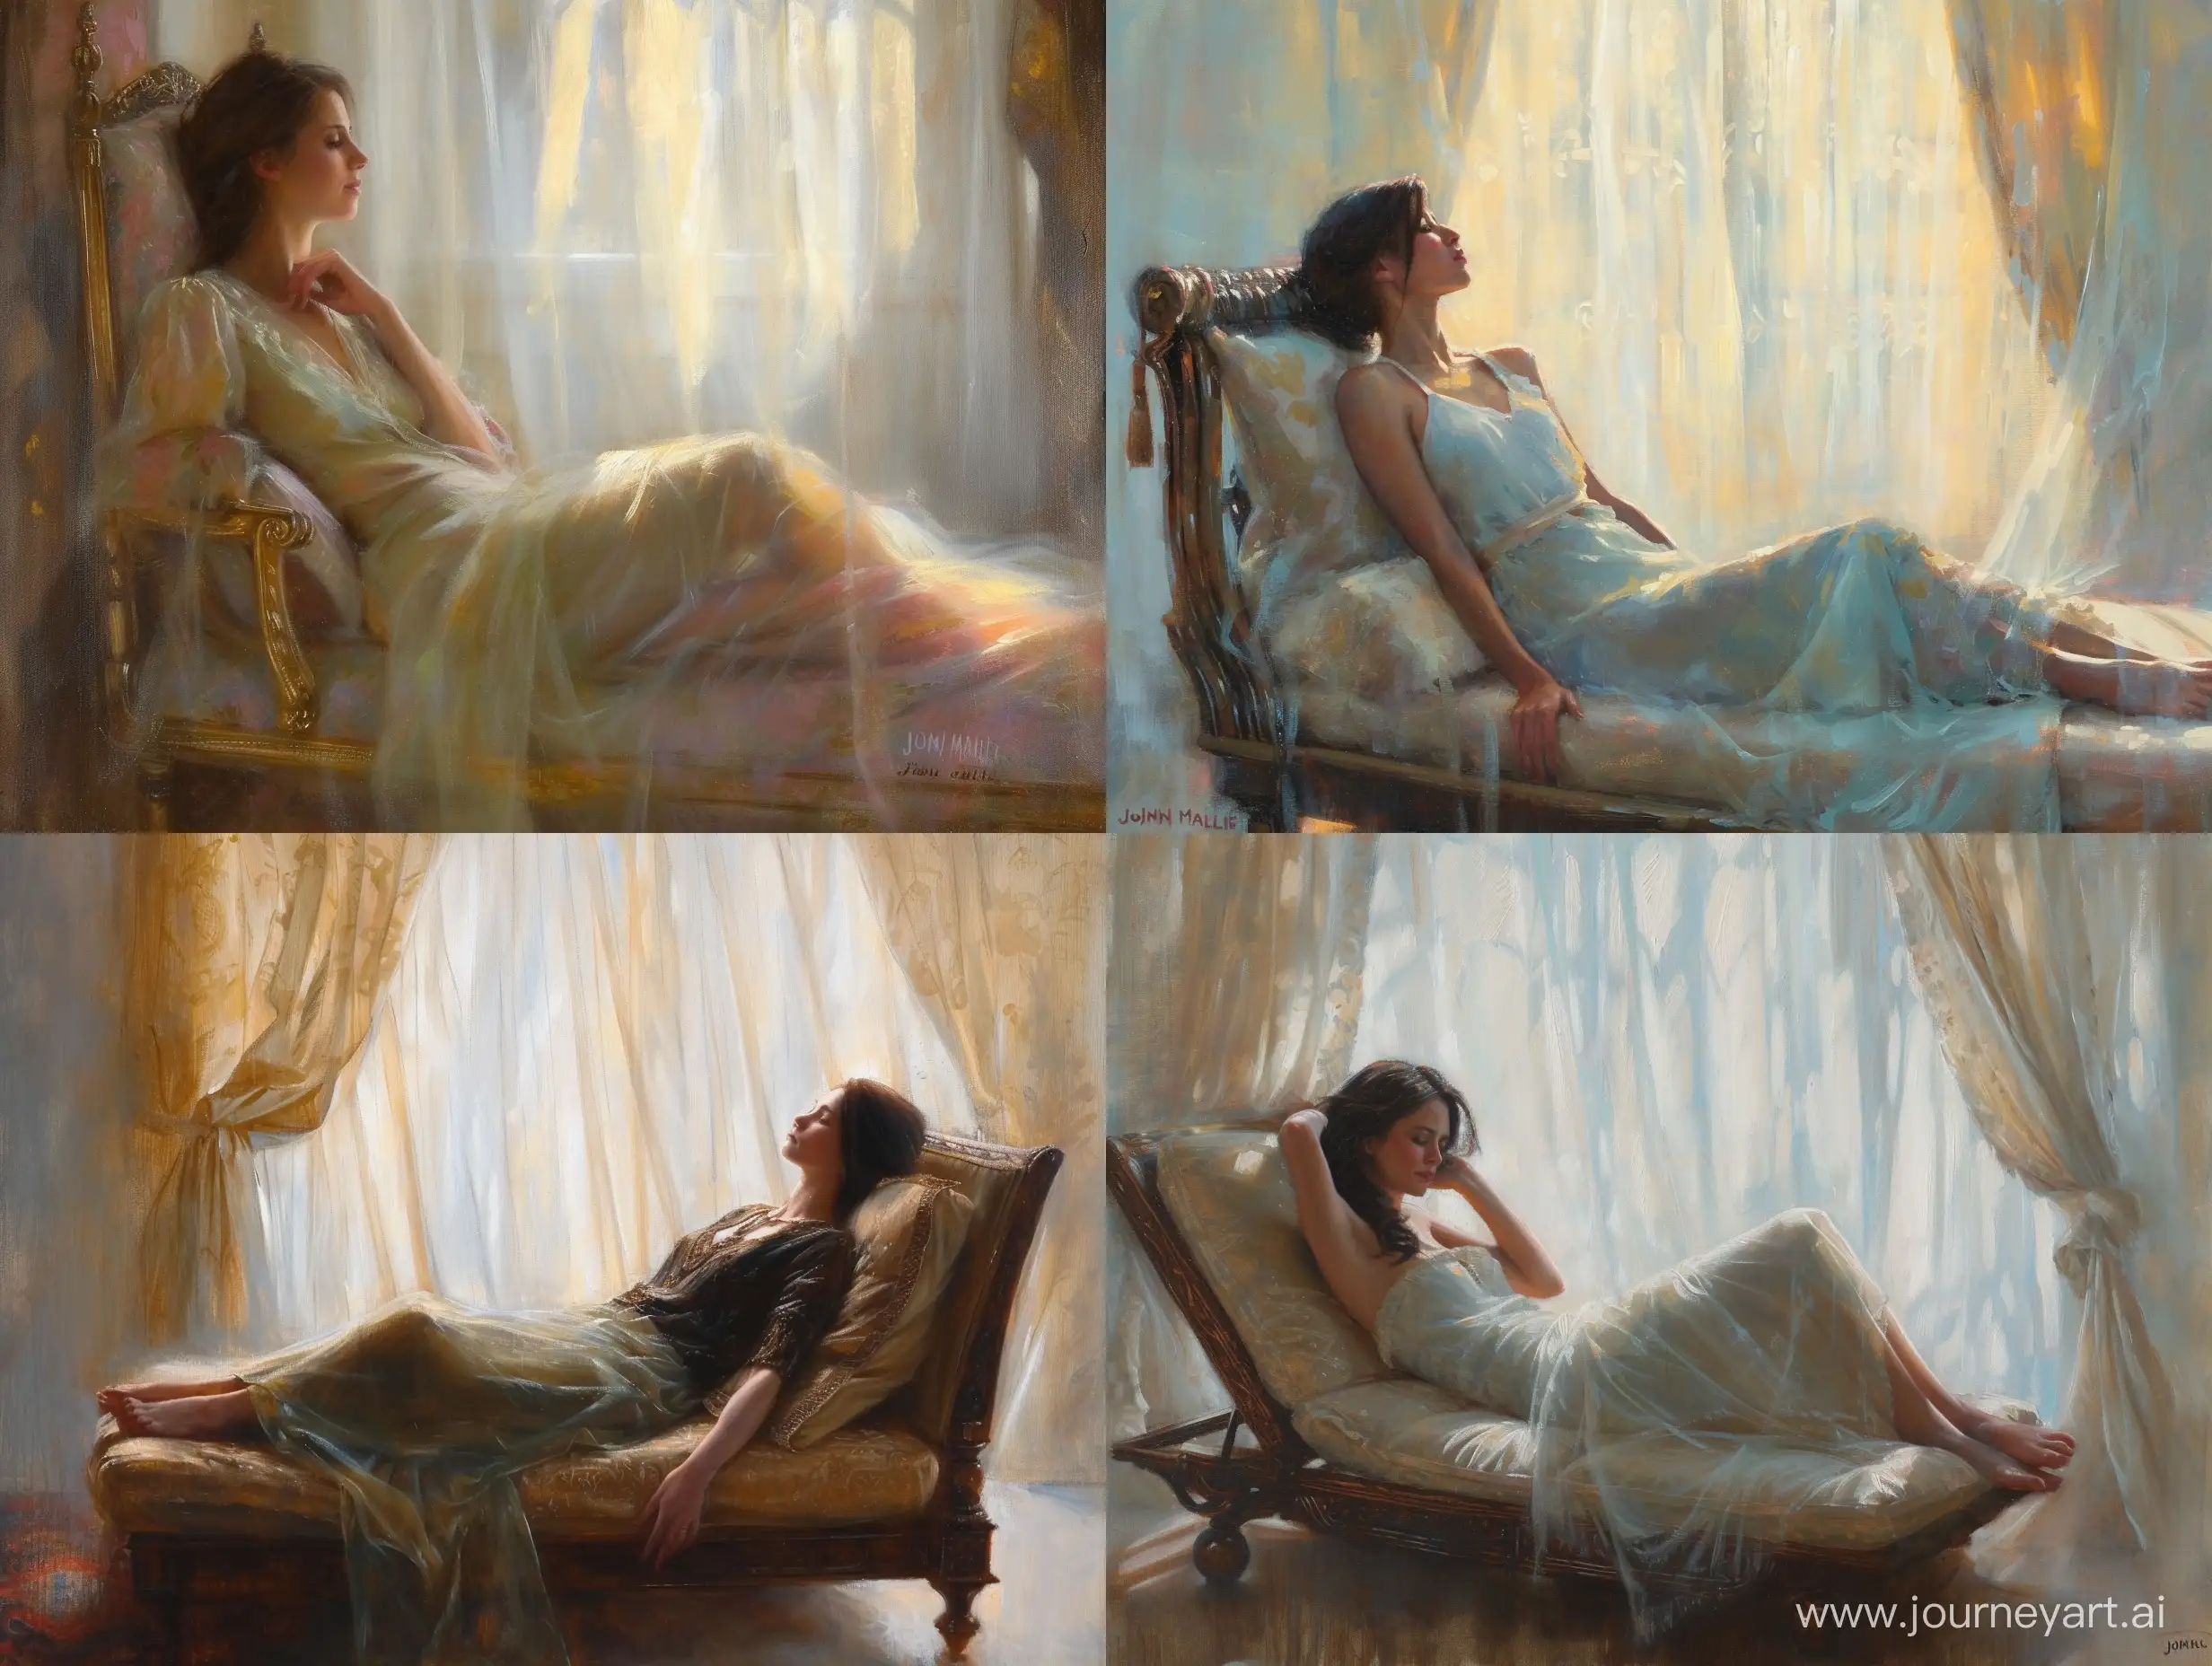 Painting of a woman reclining on a chaise lounge, lost in a daydream, with soft light filtering through sheer curtains, by  JOHN MALER COLLIER